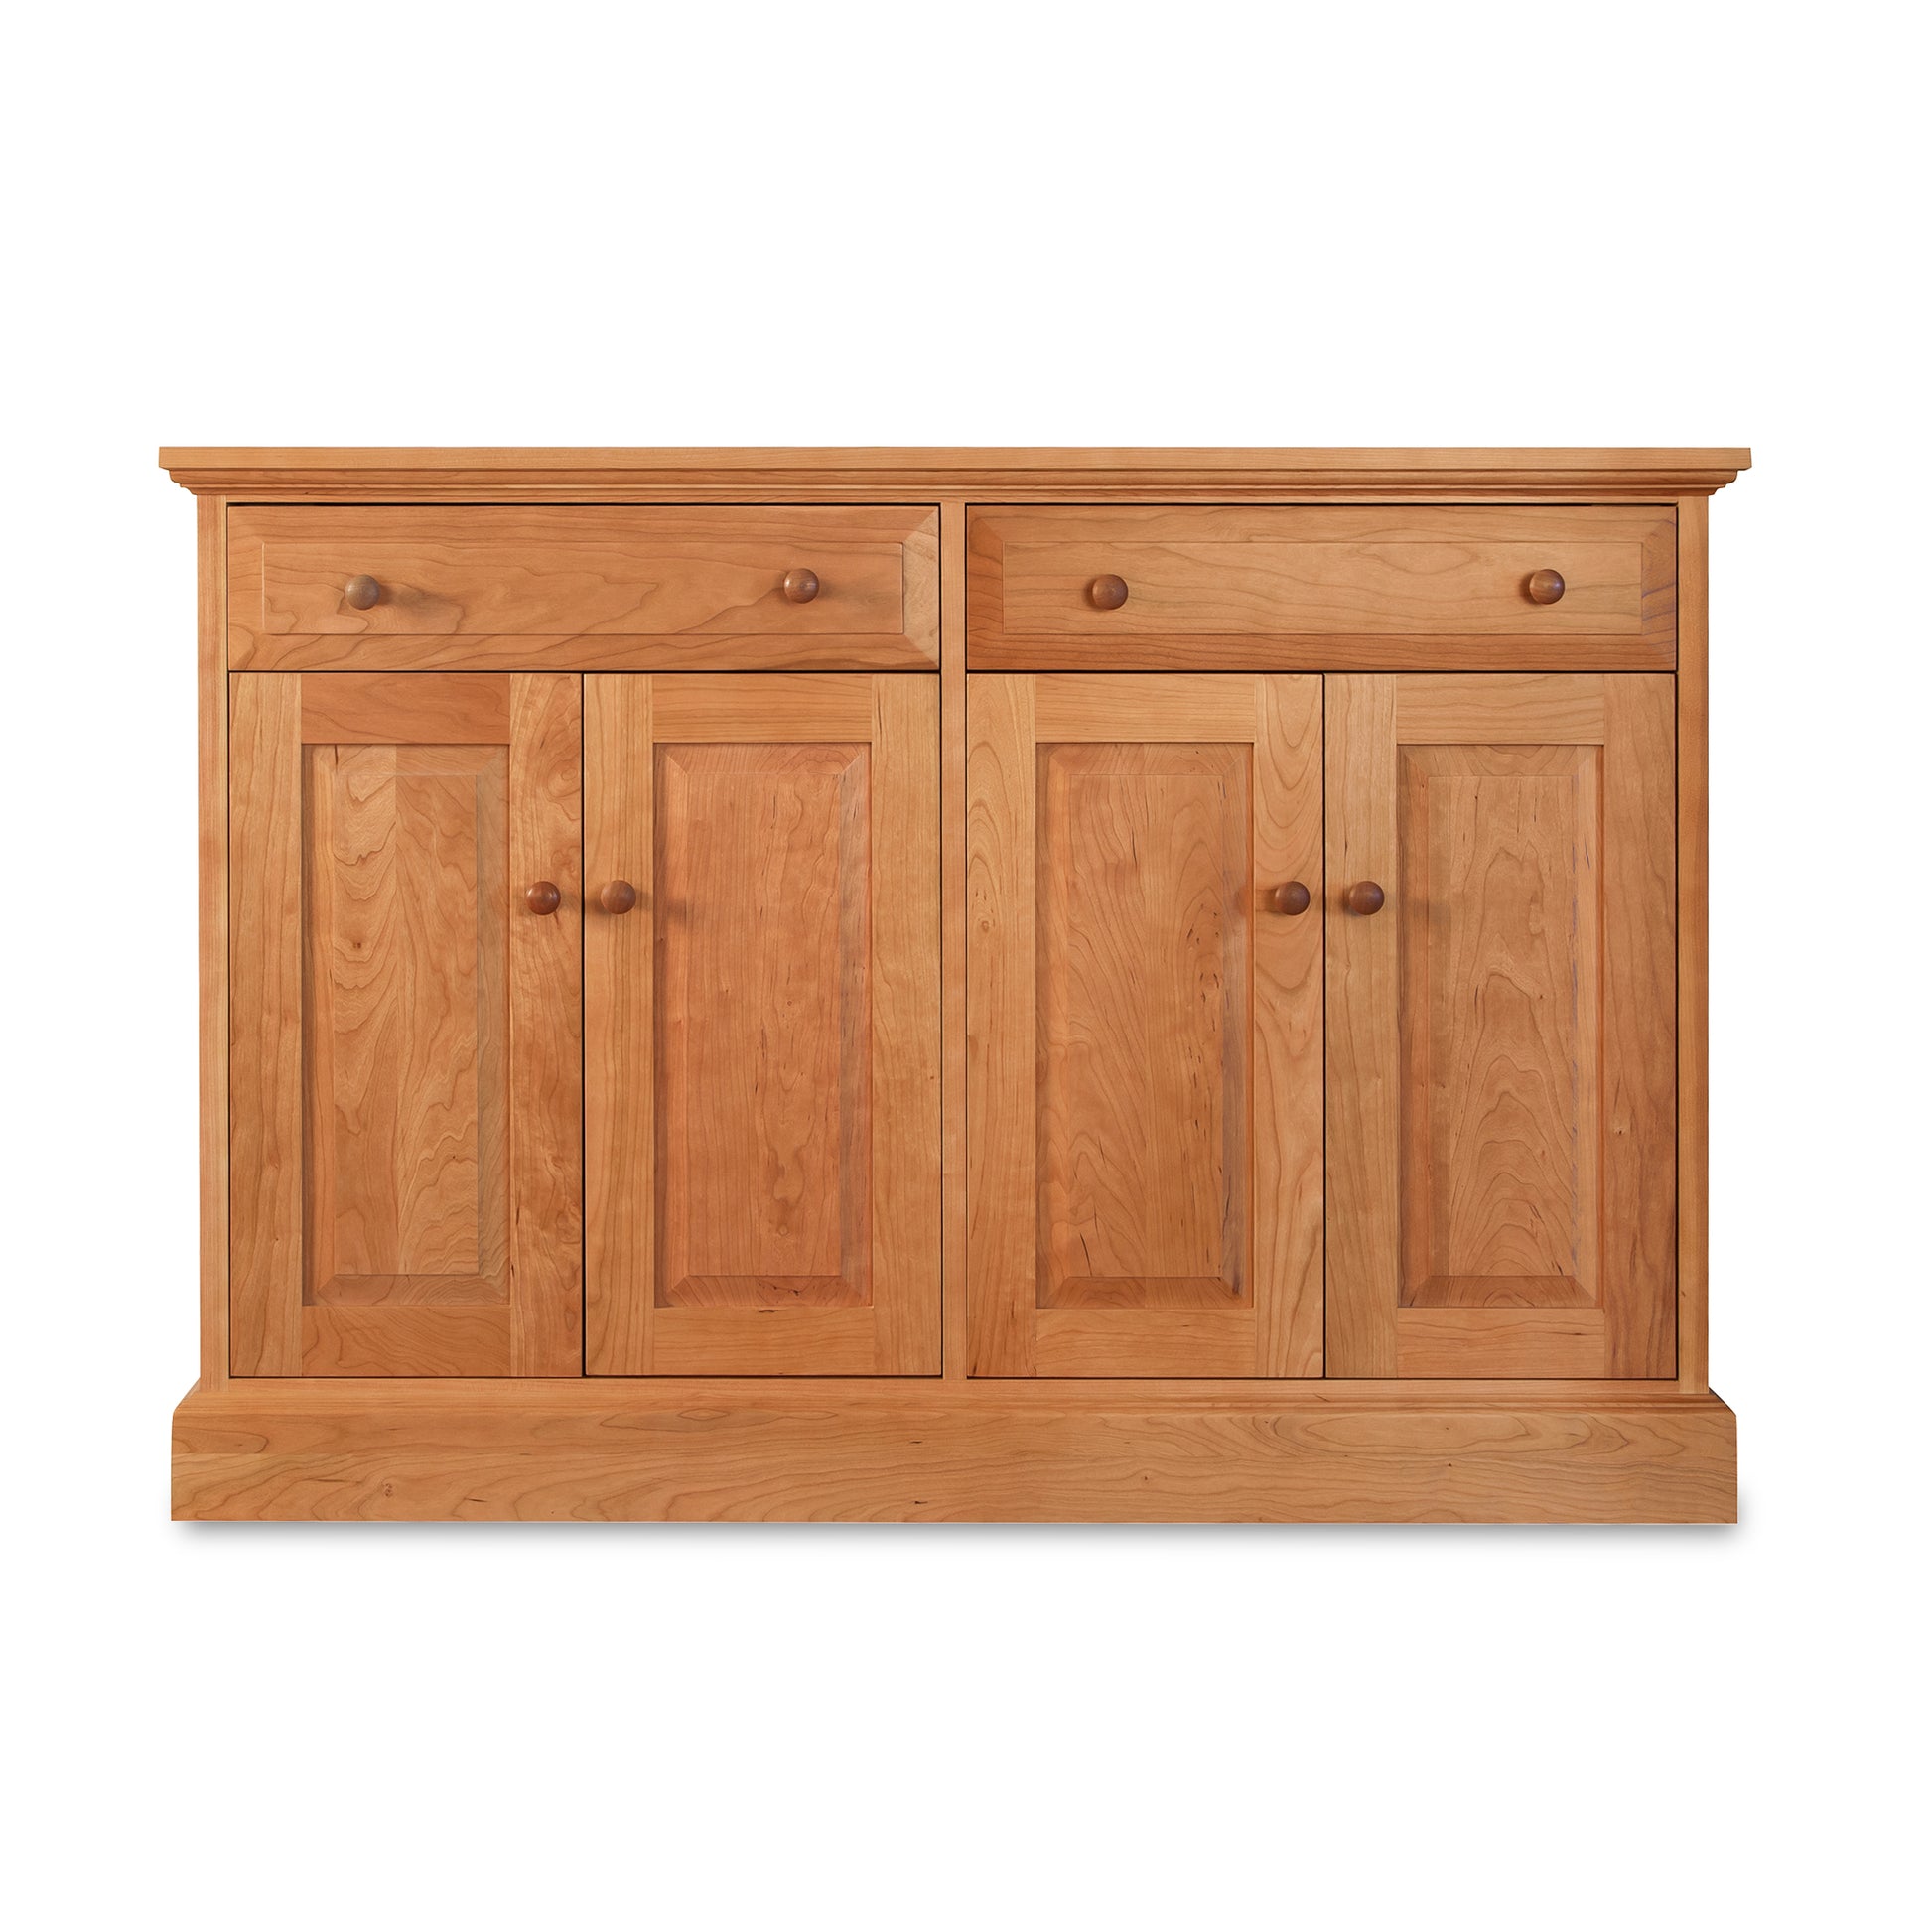 A New England Shaker Buffet made by Lyndon Furniture, featuring two doors and two drawers, providing ample dining room storage.